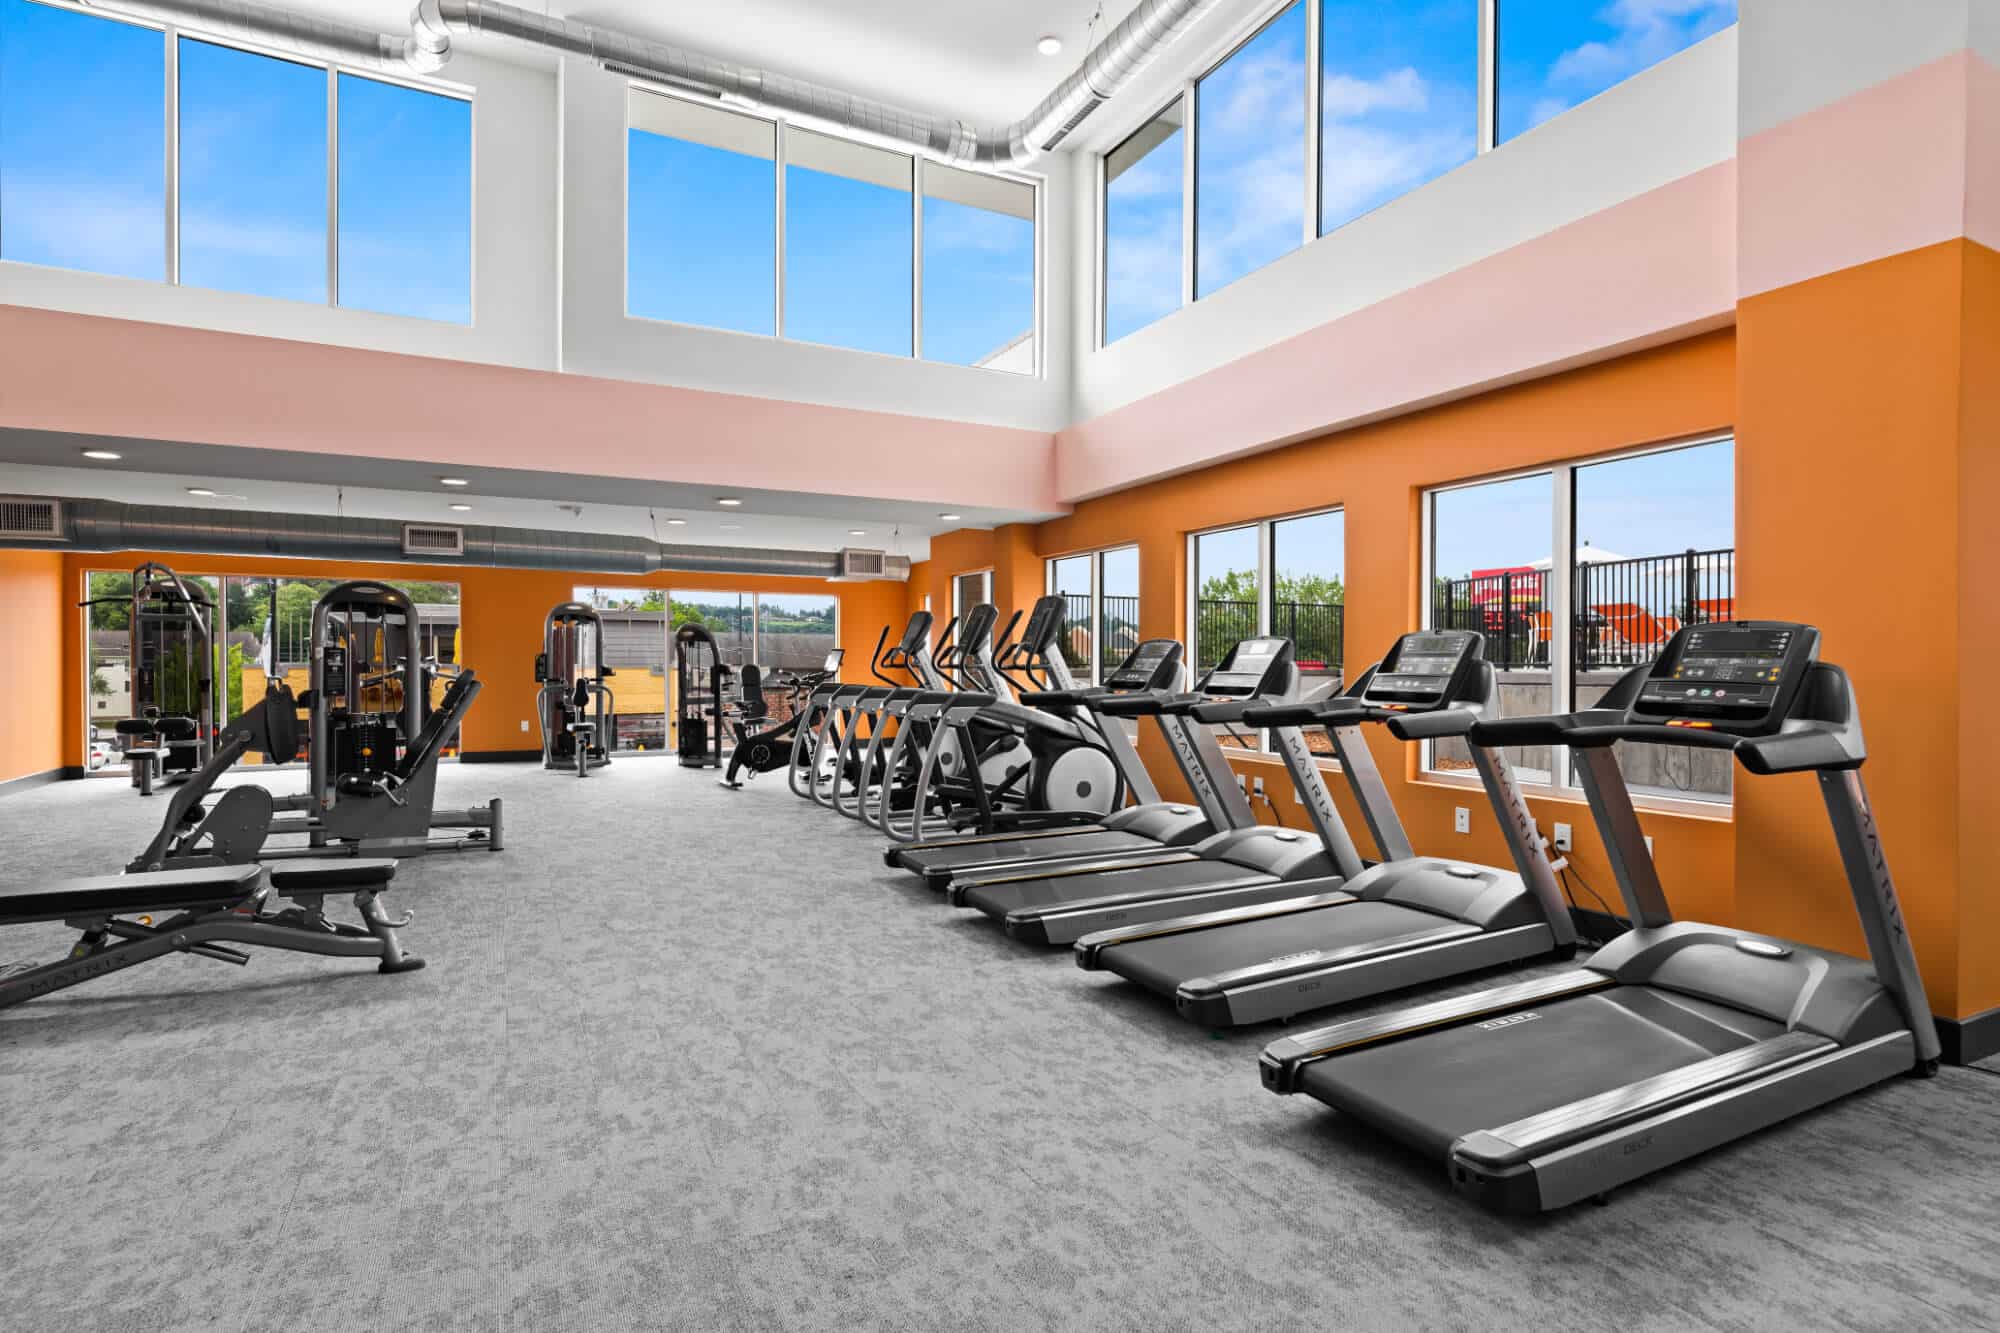 nova knoxville off campus apartments near the university of tennessee knoxville 24 hour fitness center cardio machines